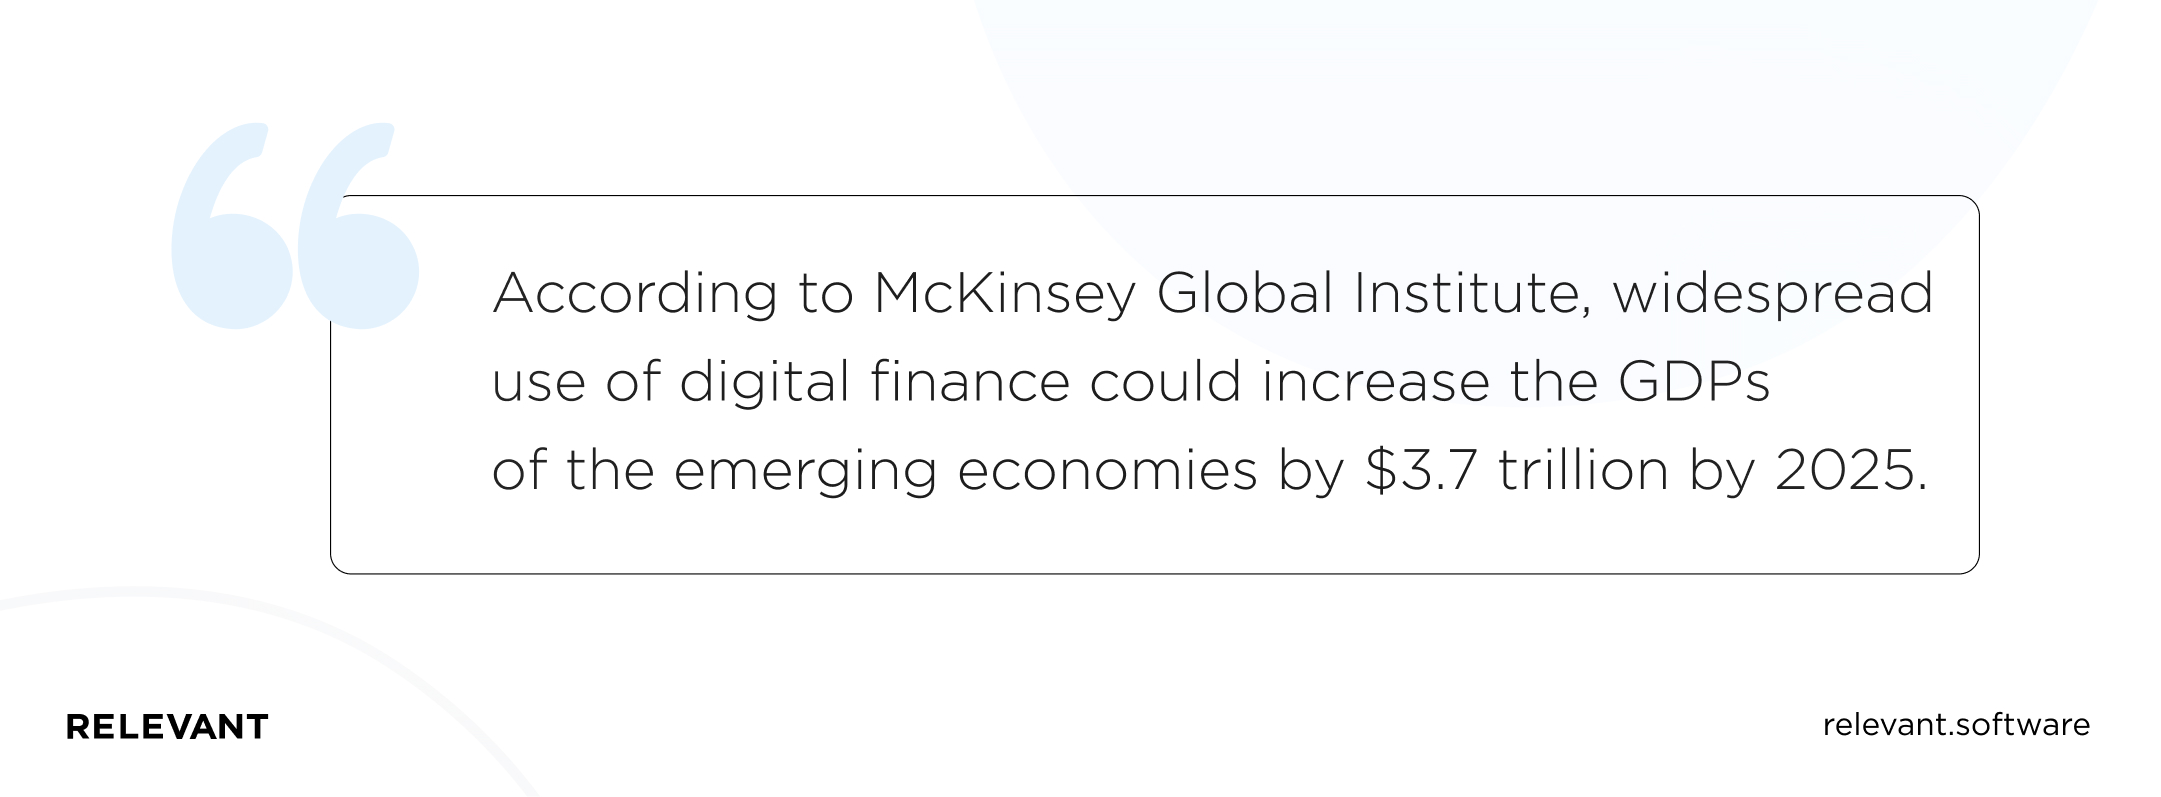 According to McKinsey Global Institute, widespread use of digital finance could increase the GDPs of the emerging economies by .7 trillion by 2025.